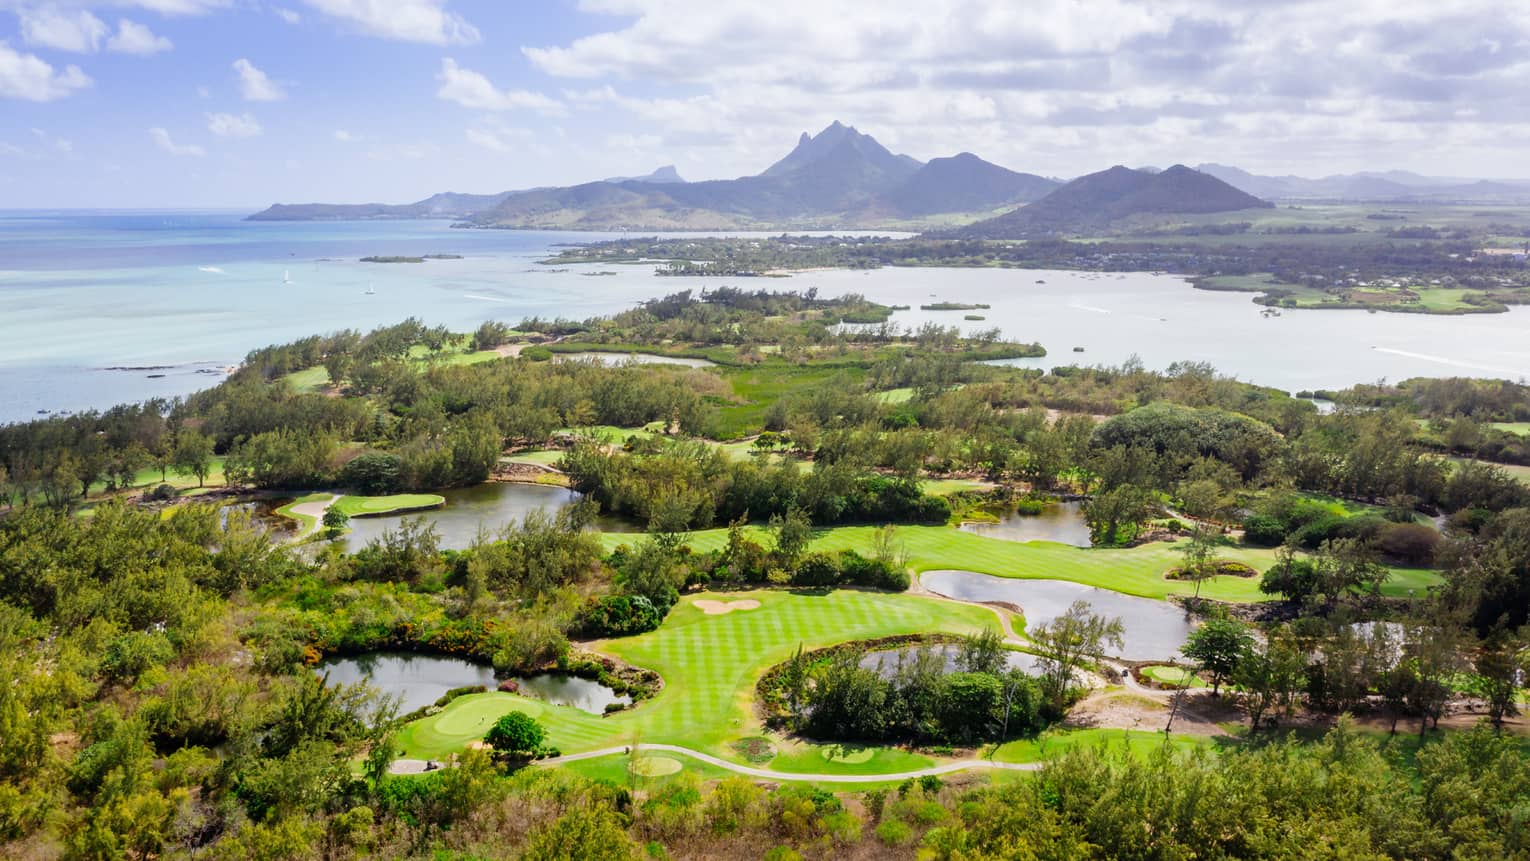 Aerial view of golf course with Indian Ocean and mountains in backdrop